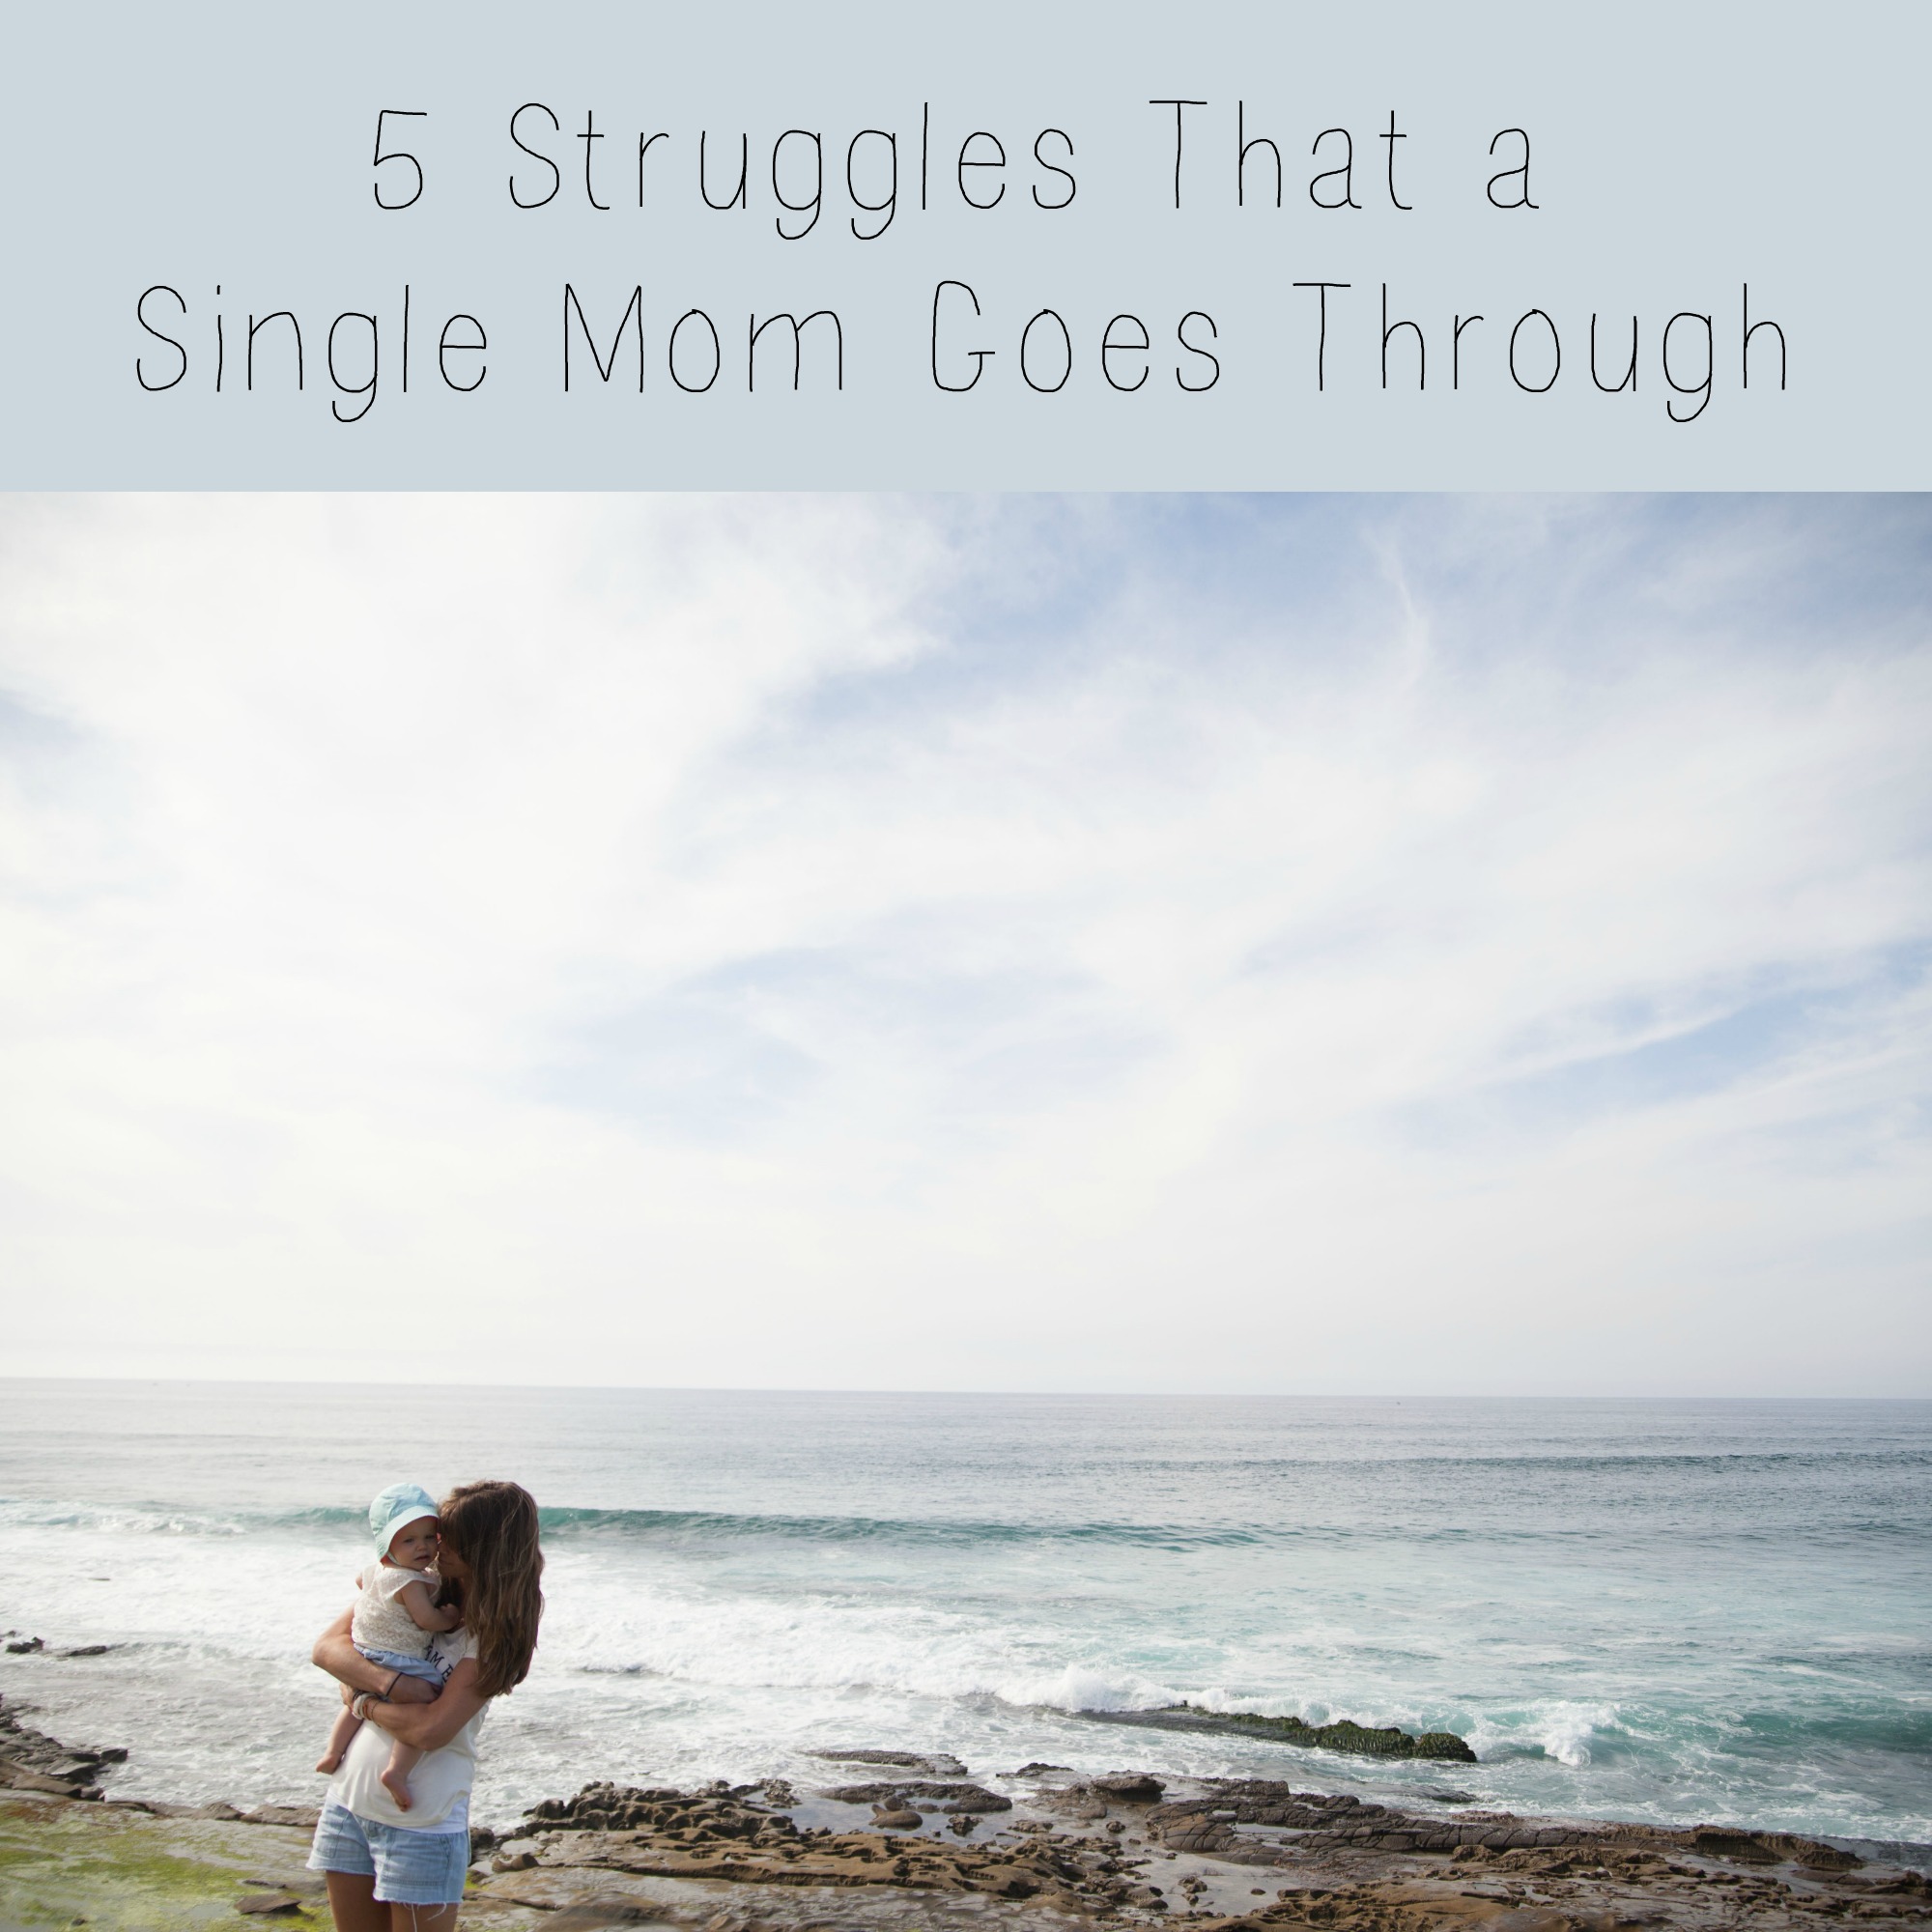 5 Struggles That a Single Mom Goes Through